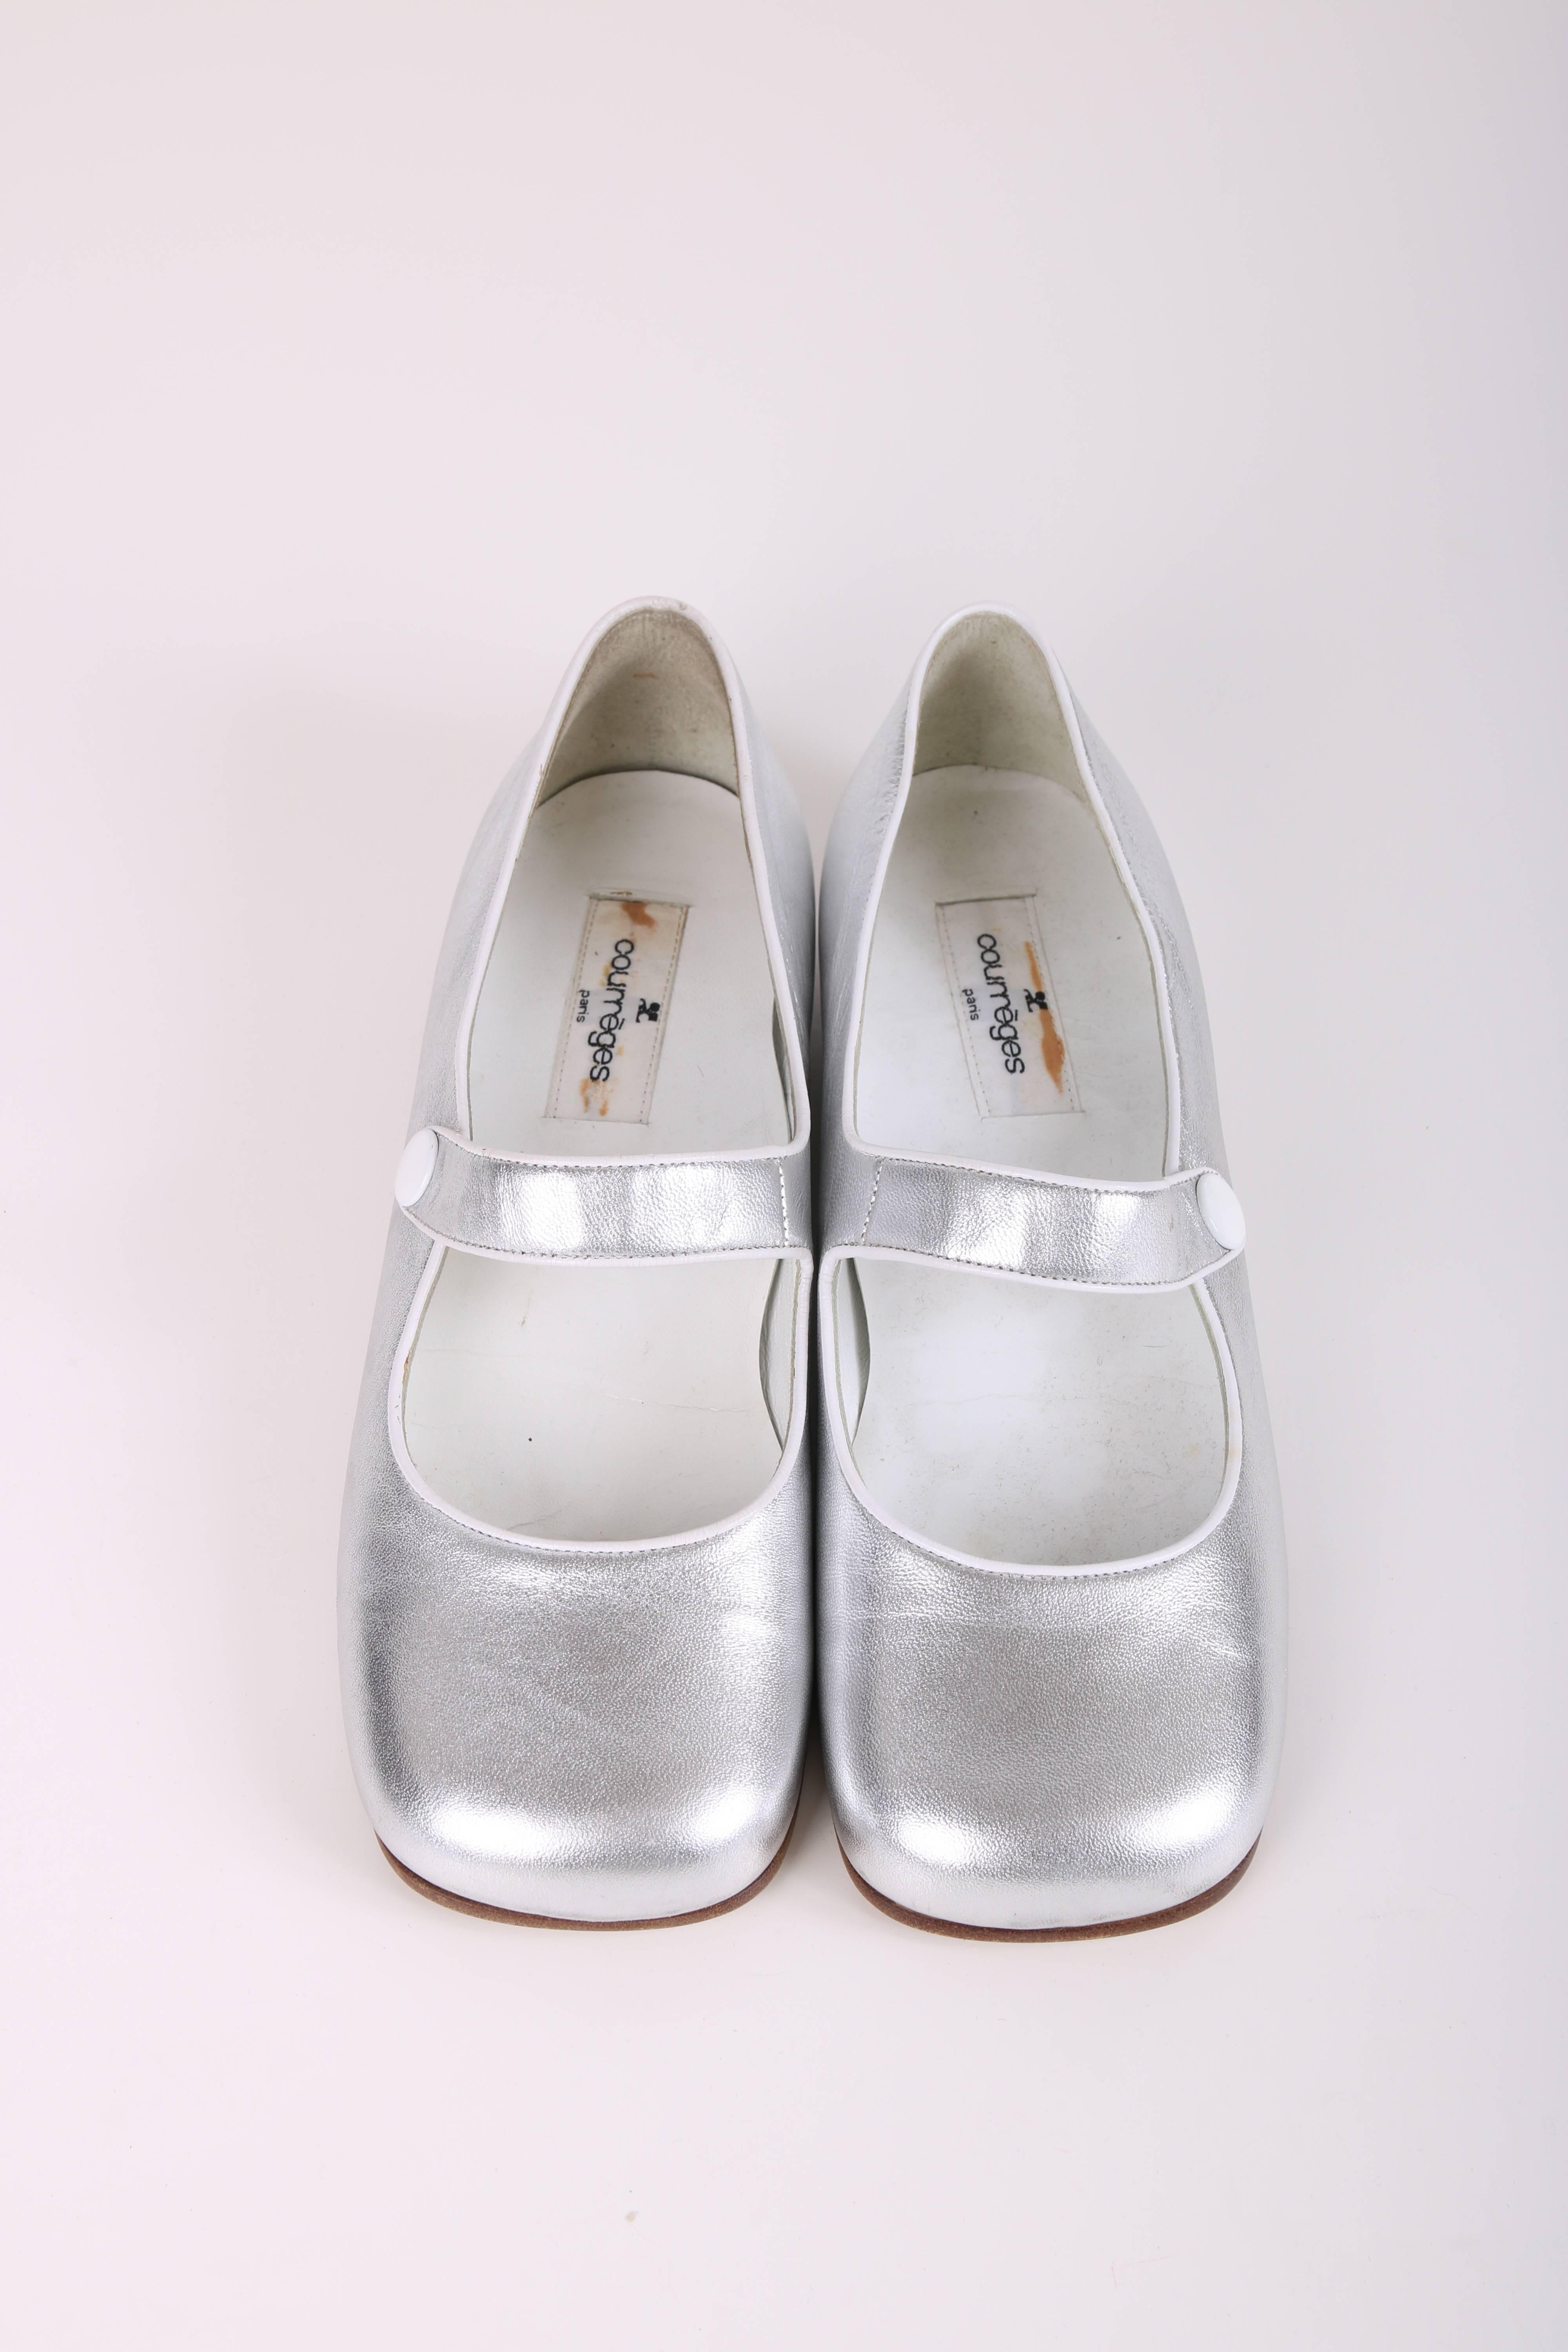 courreges mary janes